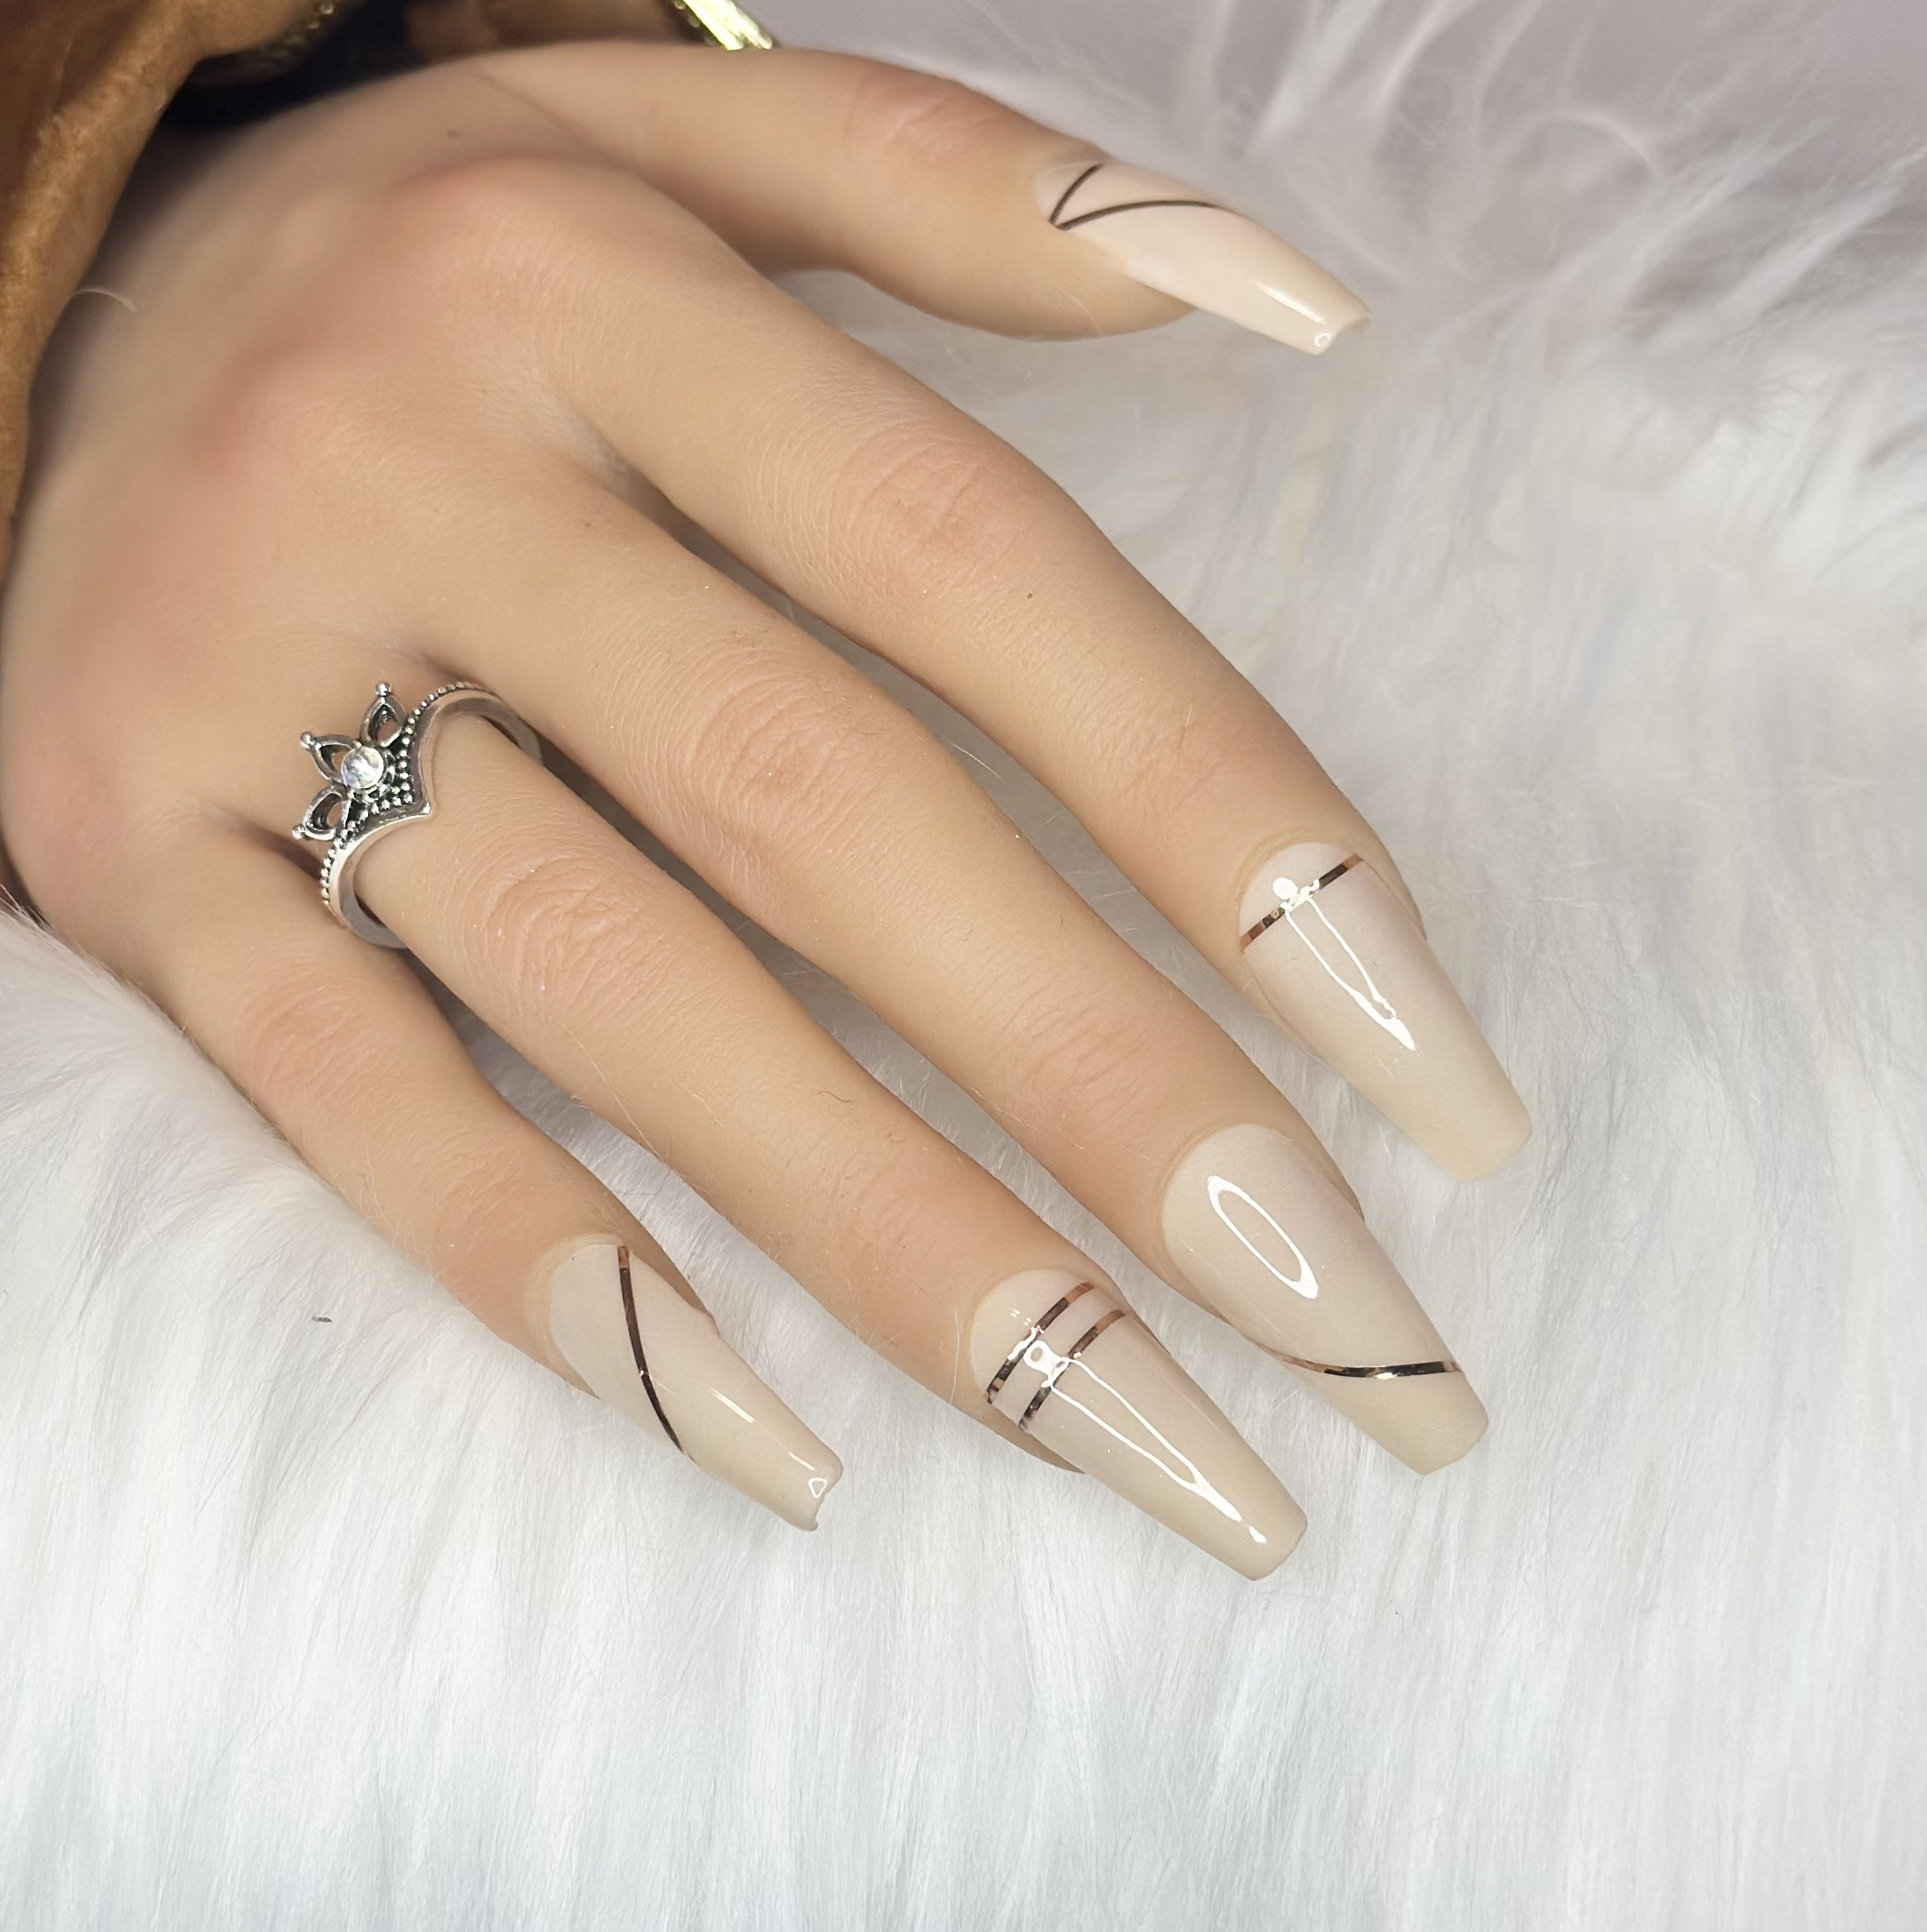 Nude Look Nails 